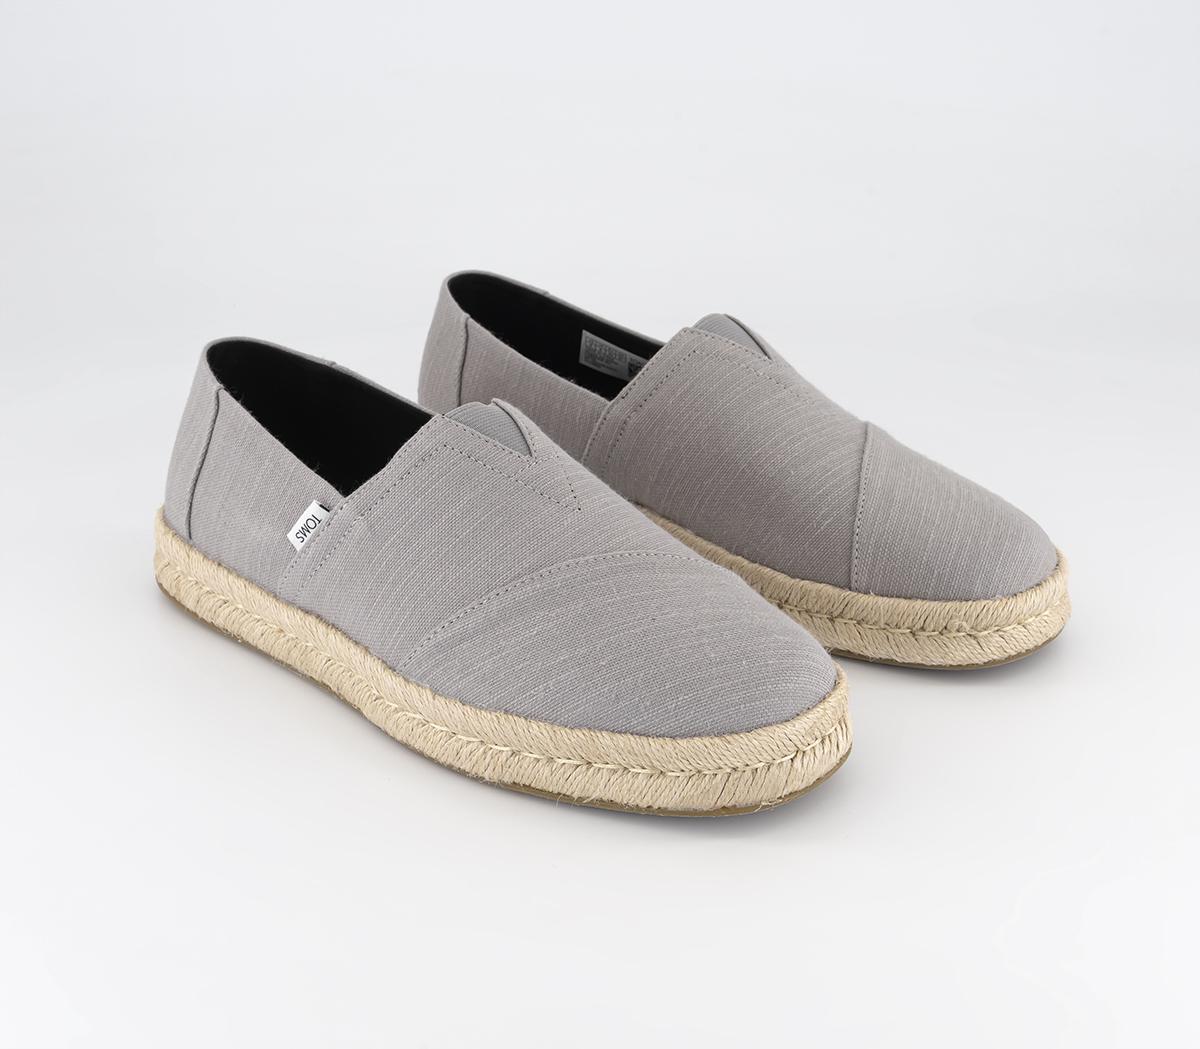 TOMS Mens Alpargata Rope 2.0 Slip Ons Drizzle Grey Recycled Cotton Slubby Woven, 8